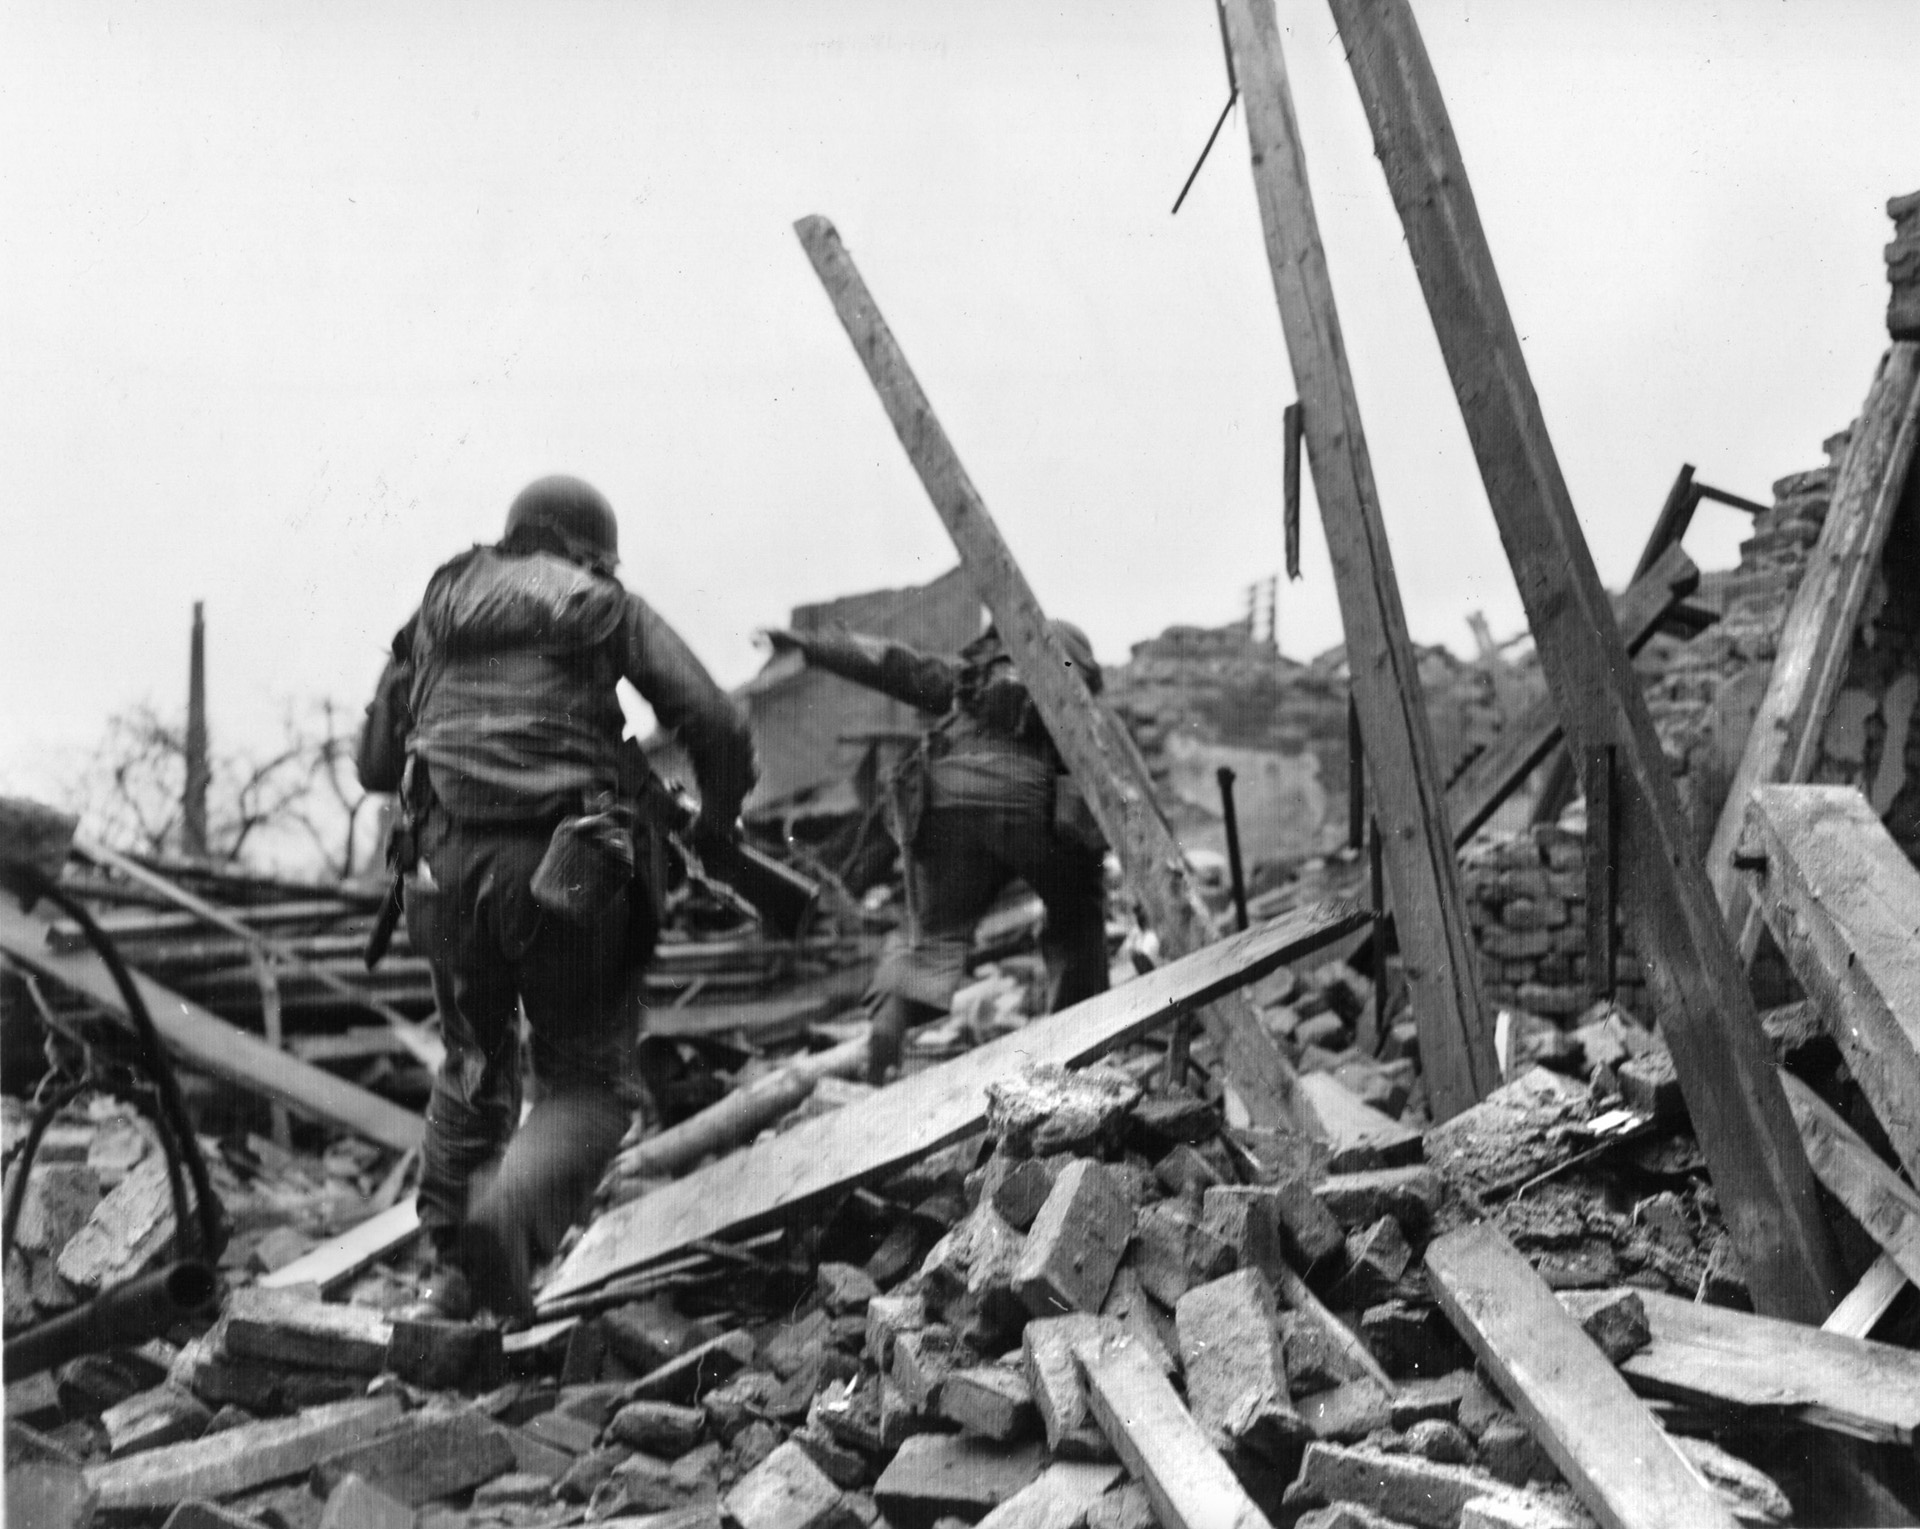 Cautiously working their way through the debris of the shattered town, American soldiers slowly take control of Aschaffenberg. 